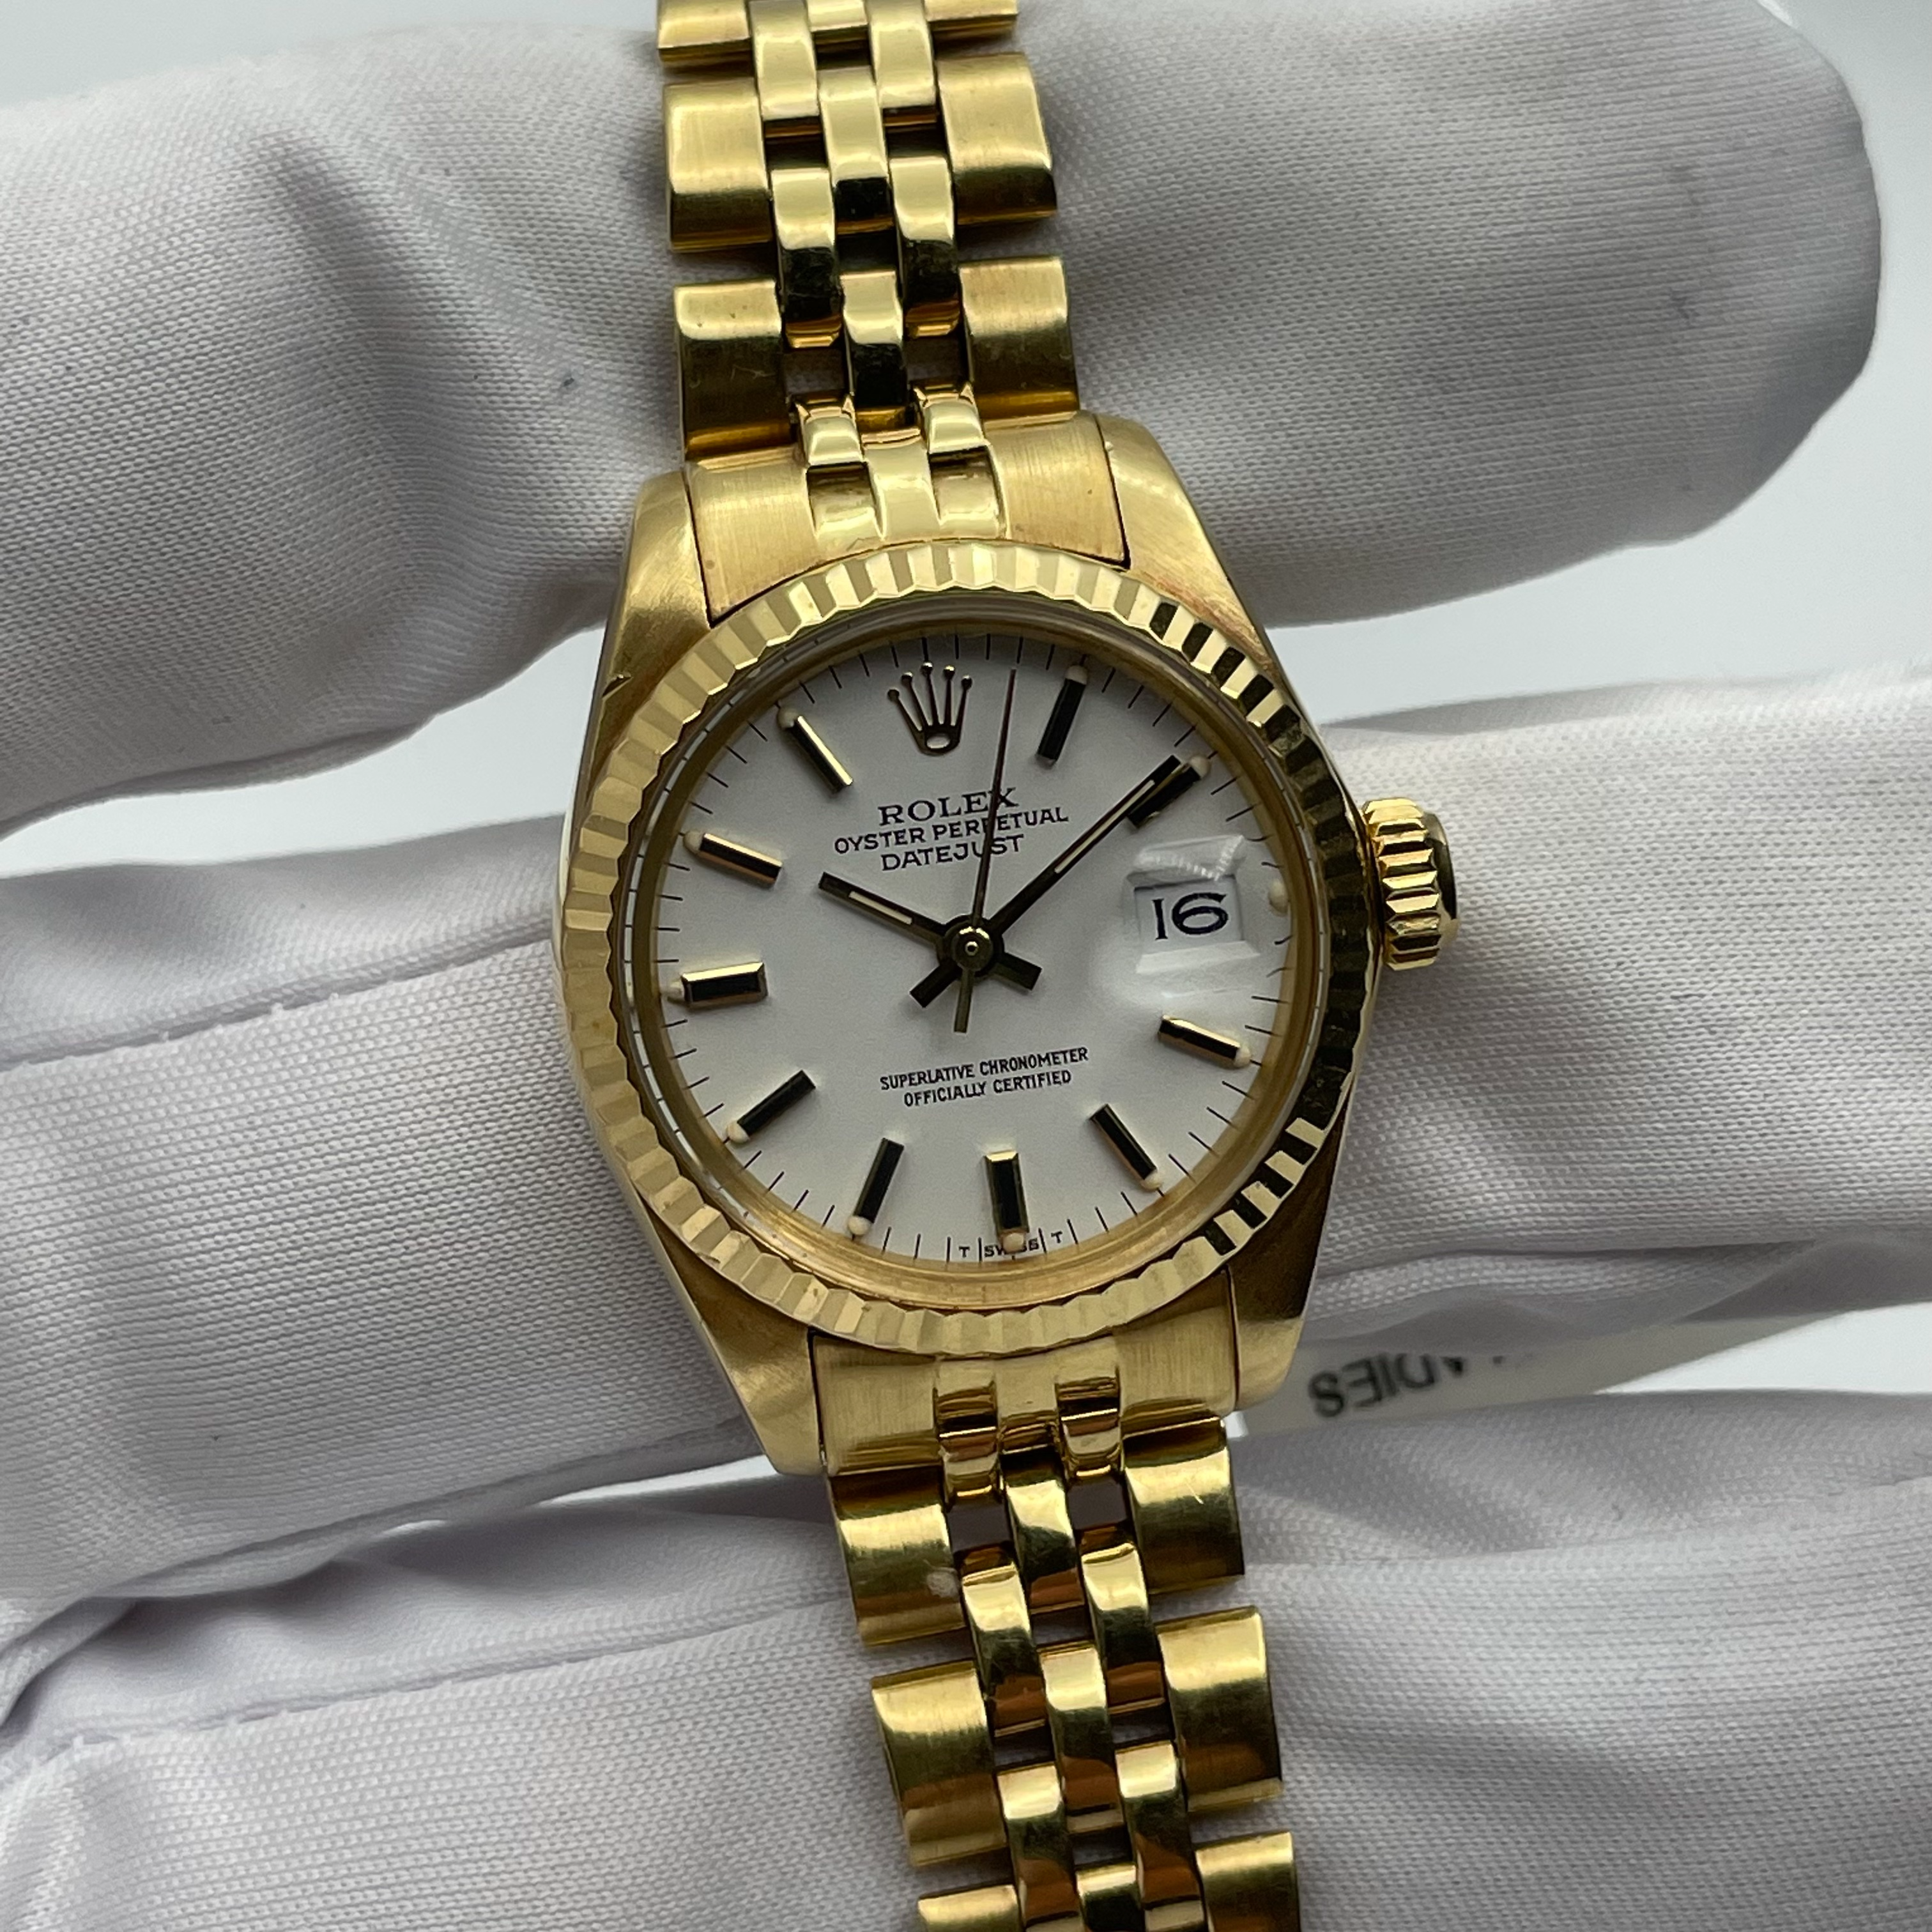 Lady's Rolex 18K Gold Oyster Perpetual Datejust ref 6917 circa 1978